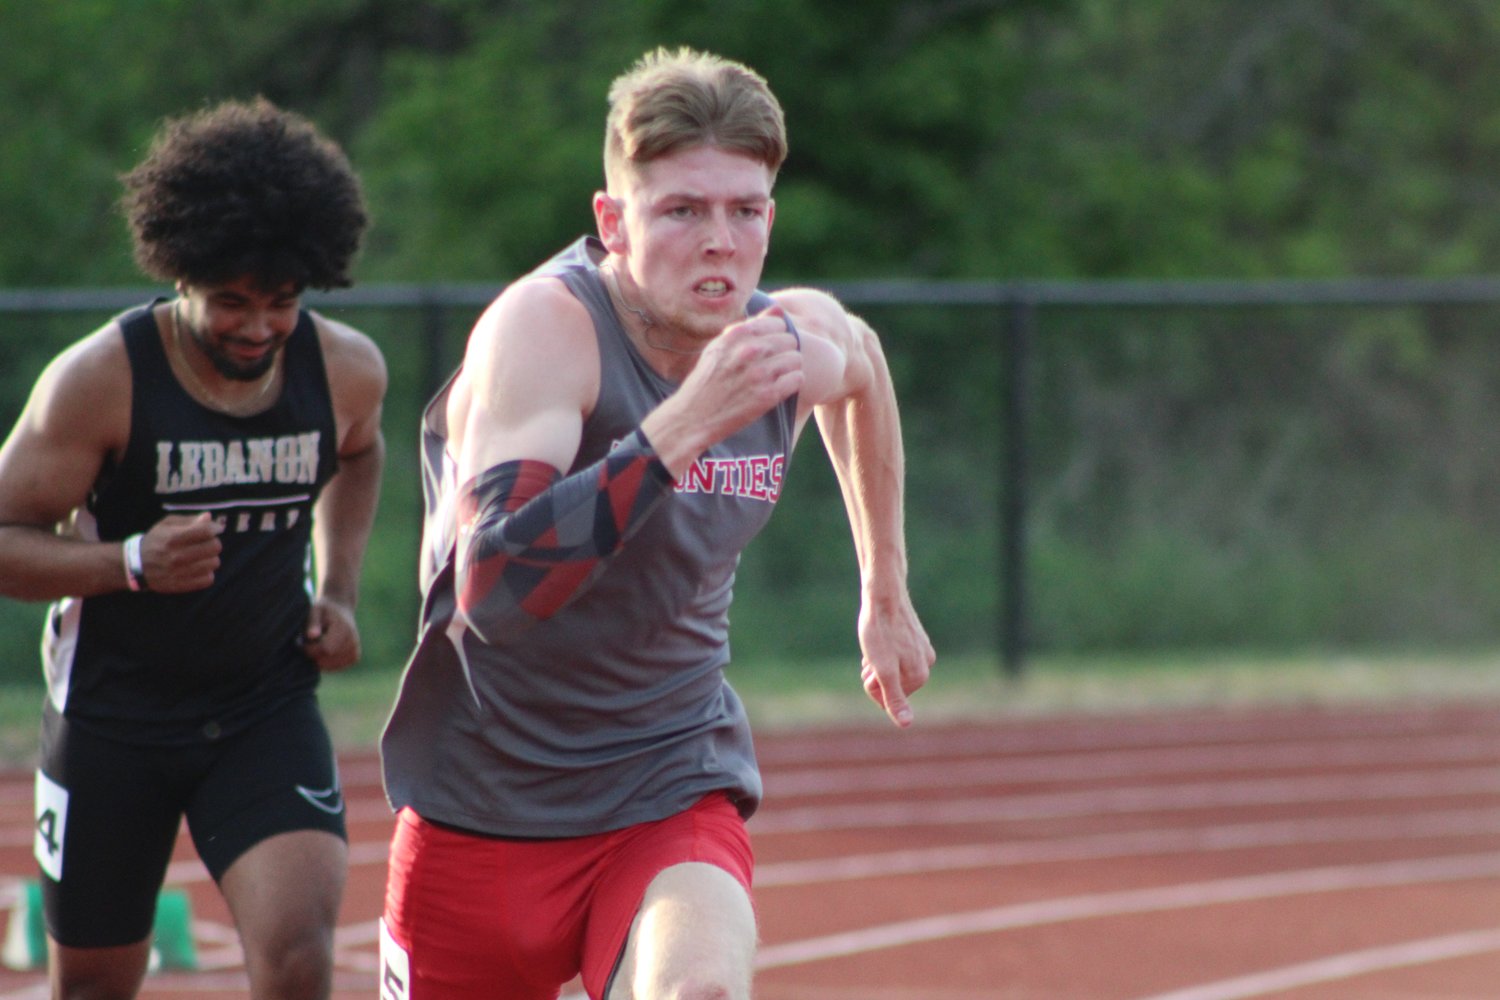 Senior Trent Jones made his return from injury and was raced to conference titles in the 100 and 400 meter dash.